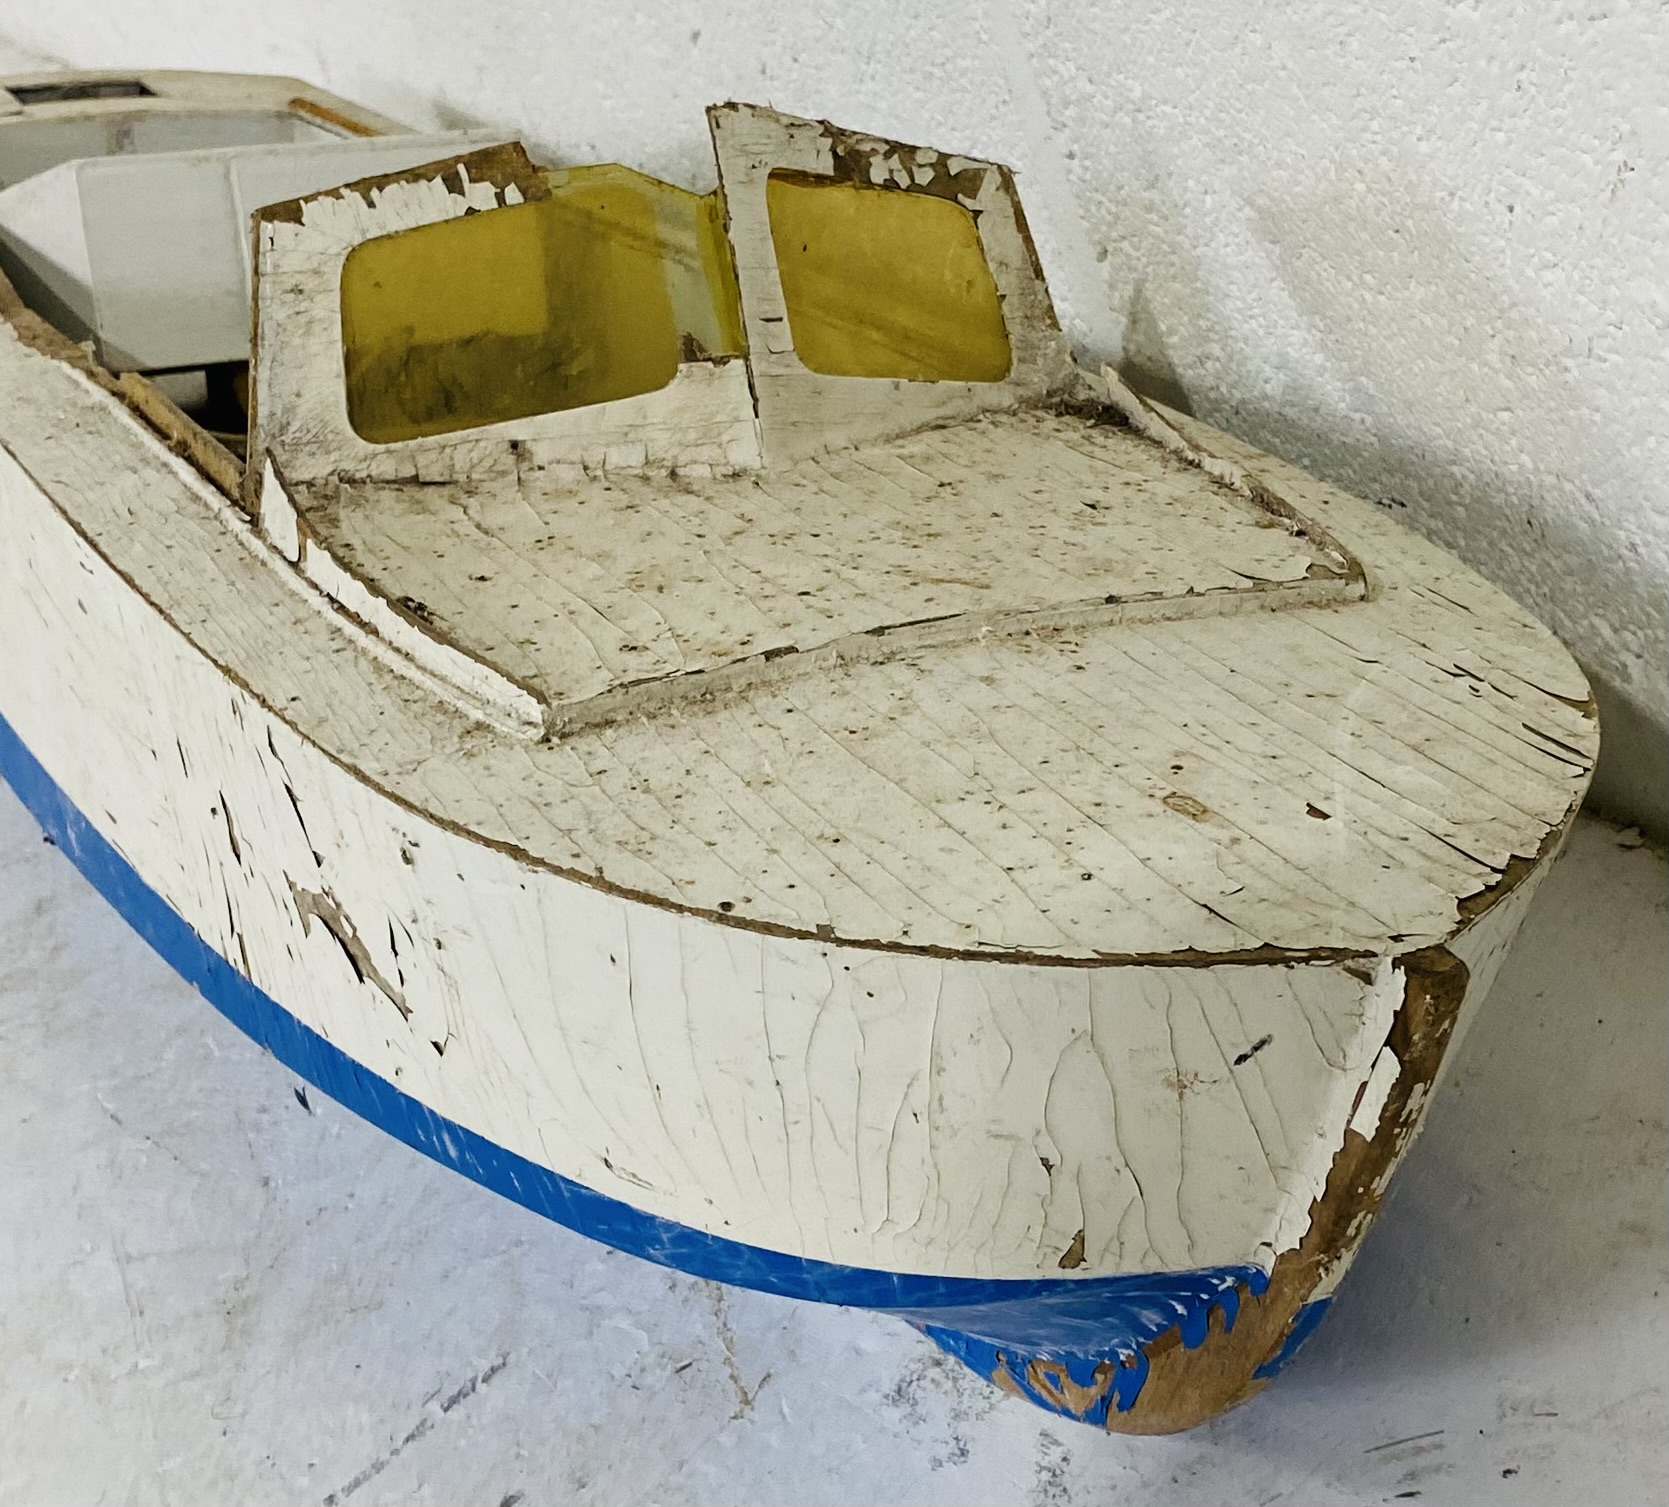 A motorised model of a speed boat - A/F - overall length 93cm - Image 4 of 6